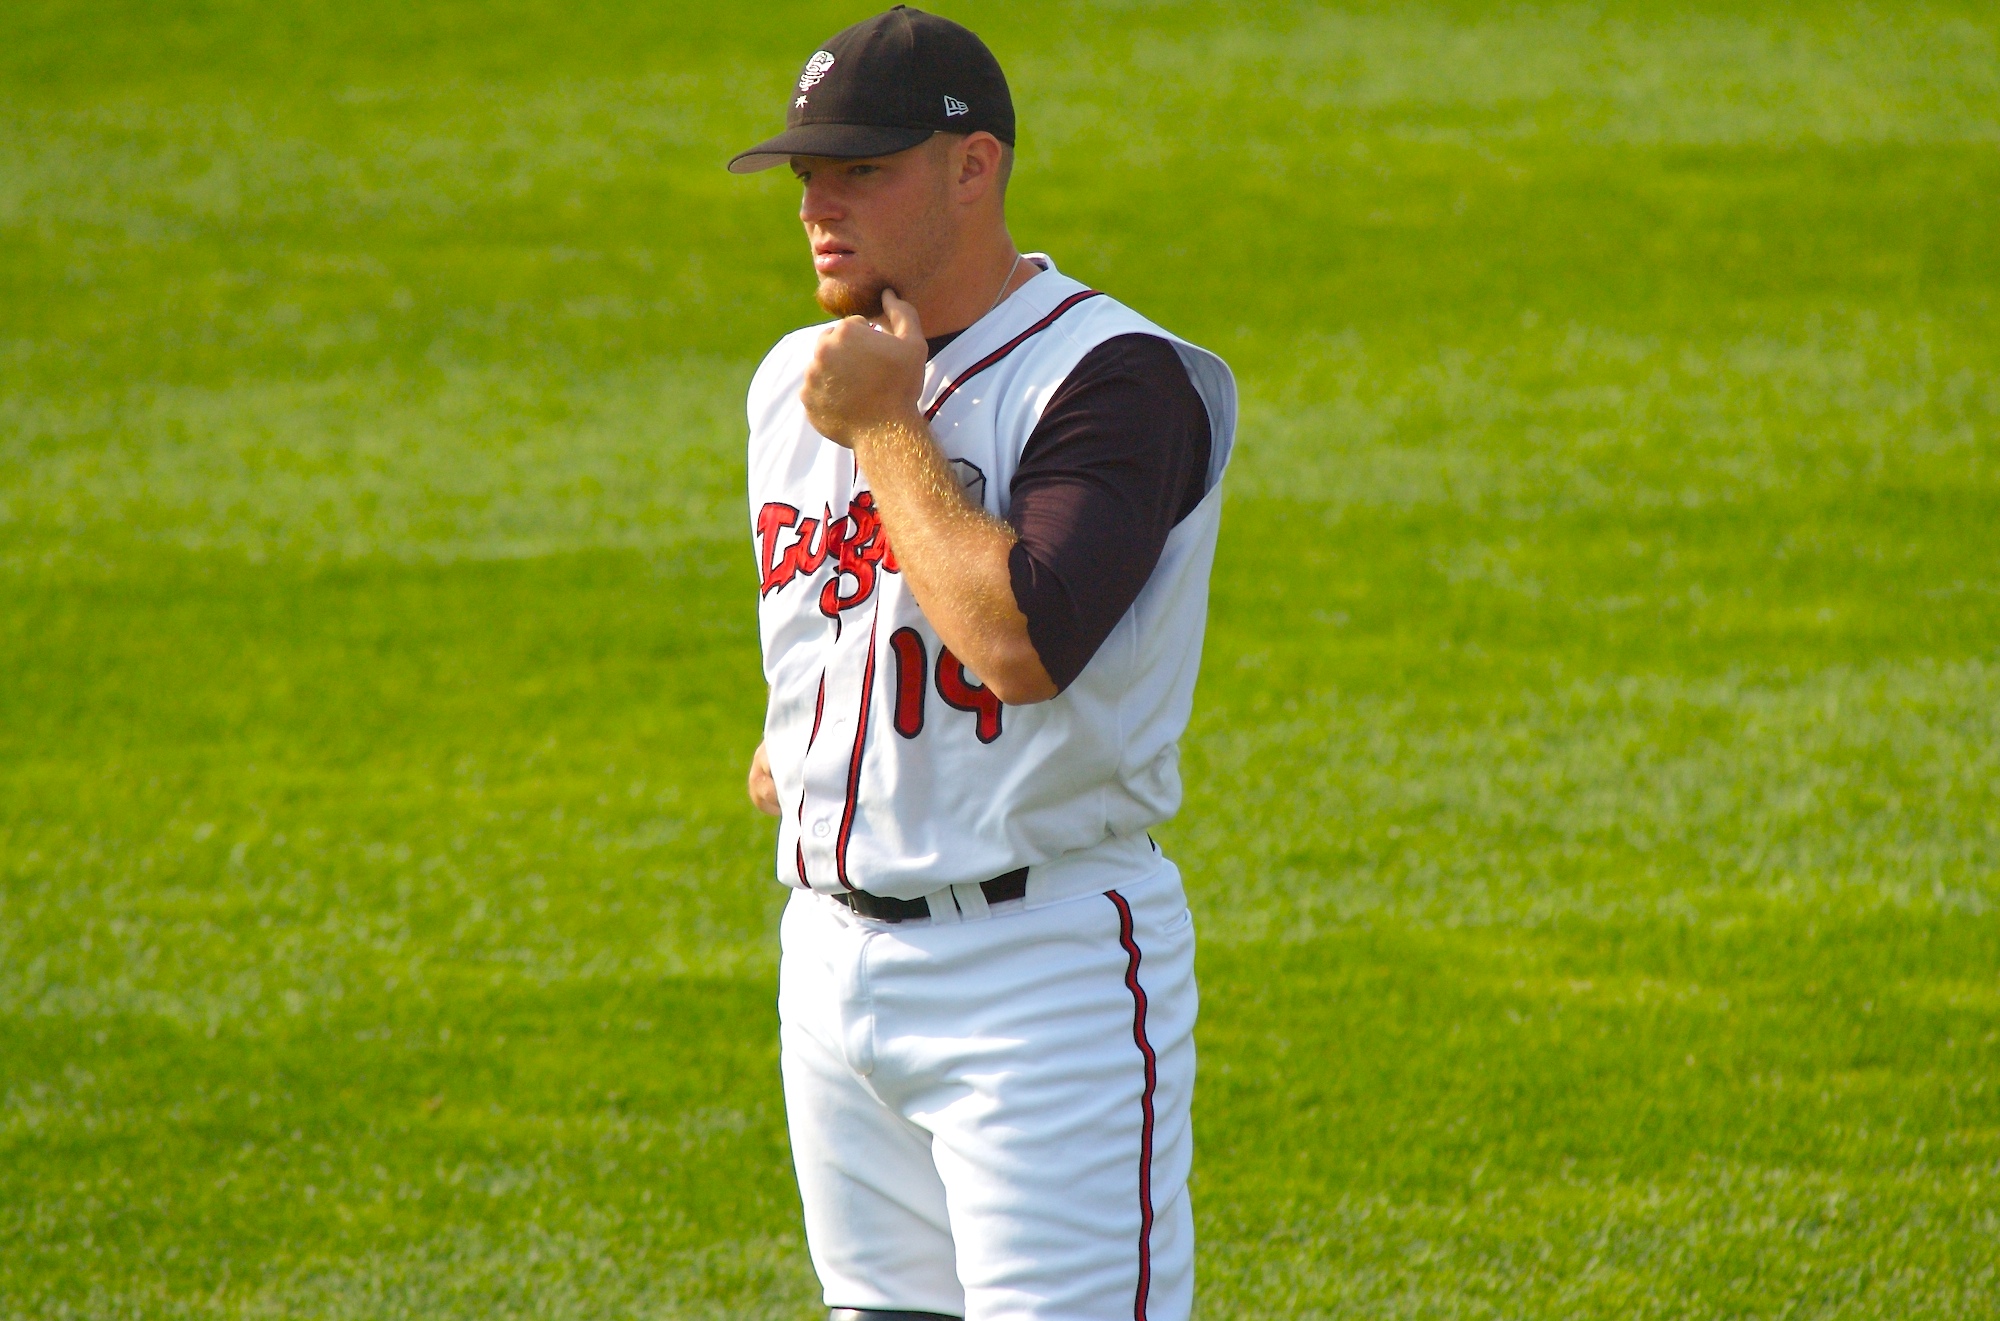 a baseball player is standing in the grass